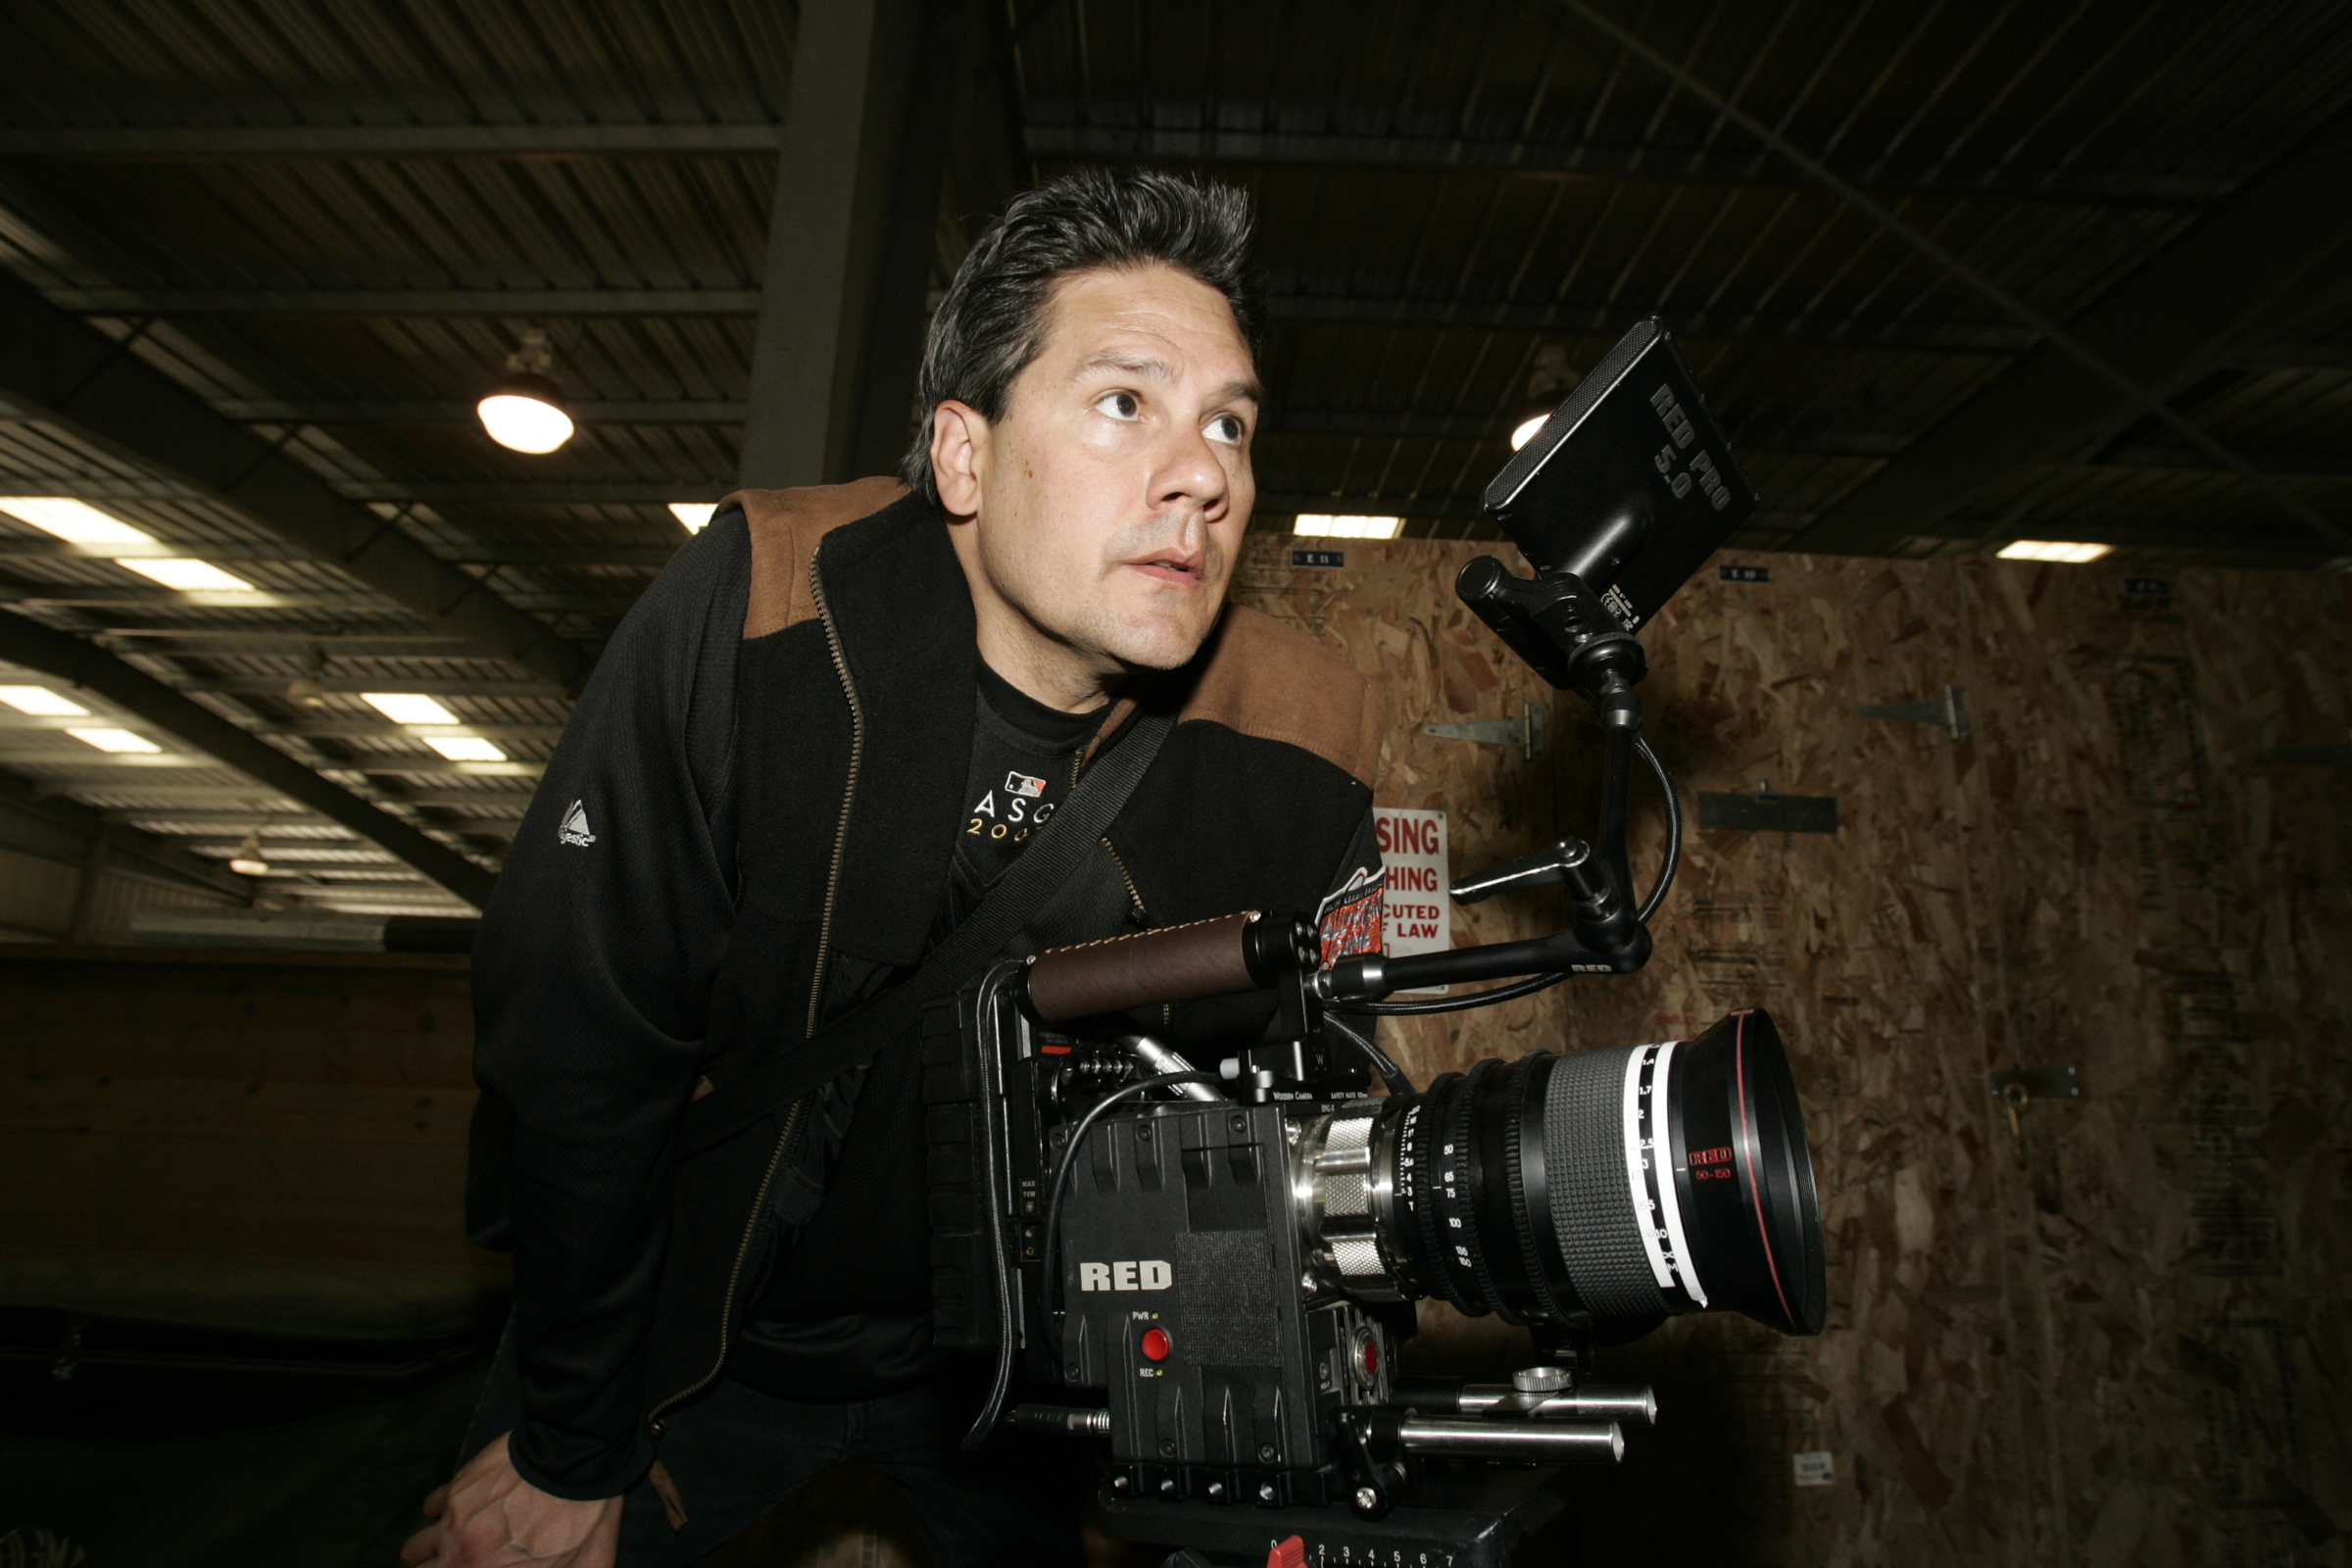 Director Scott A. Capestany on the RED EPIC on set for his Feature Film 